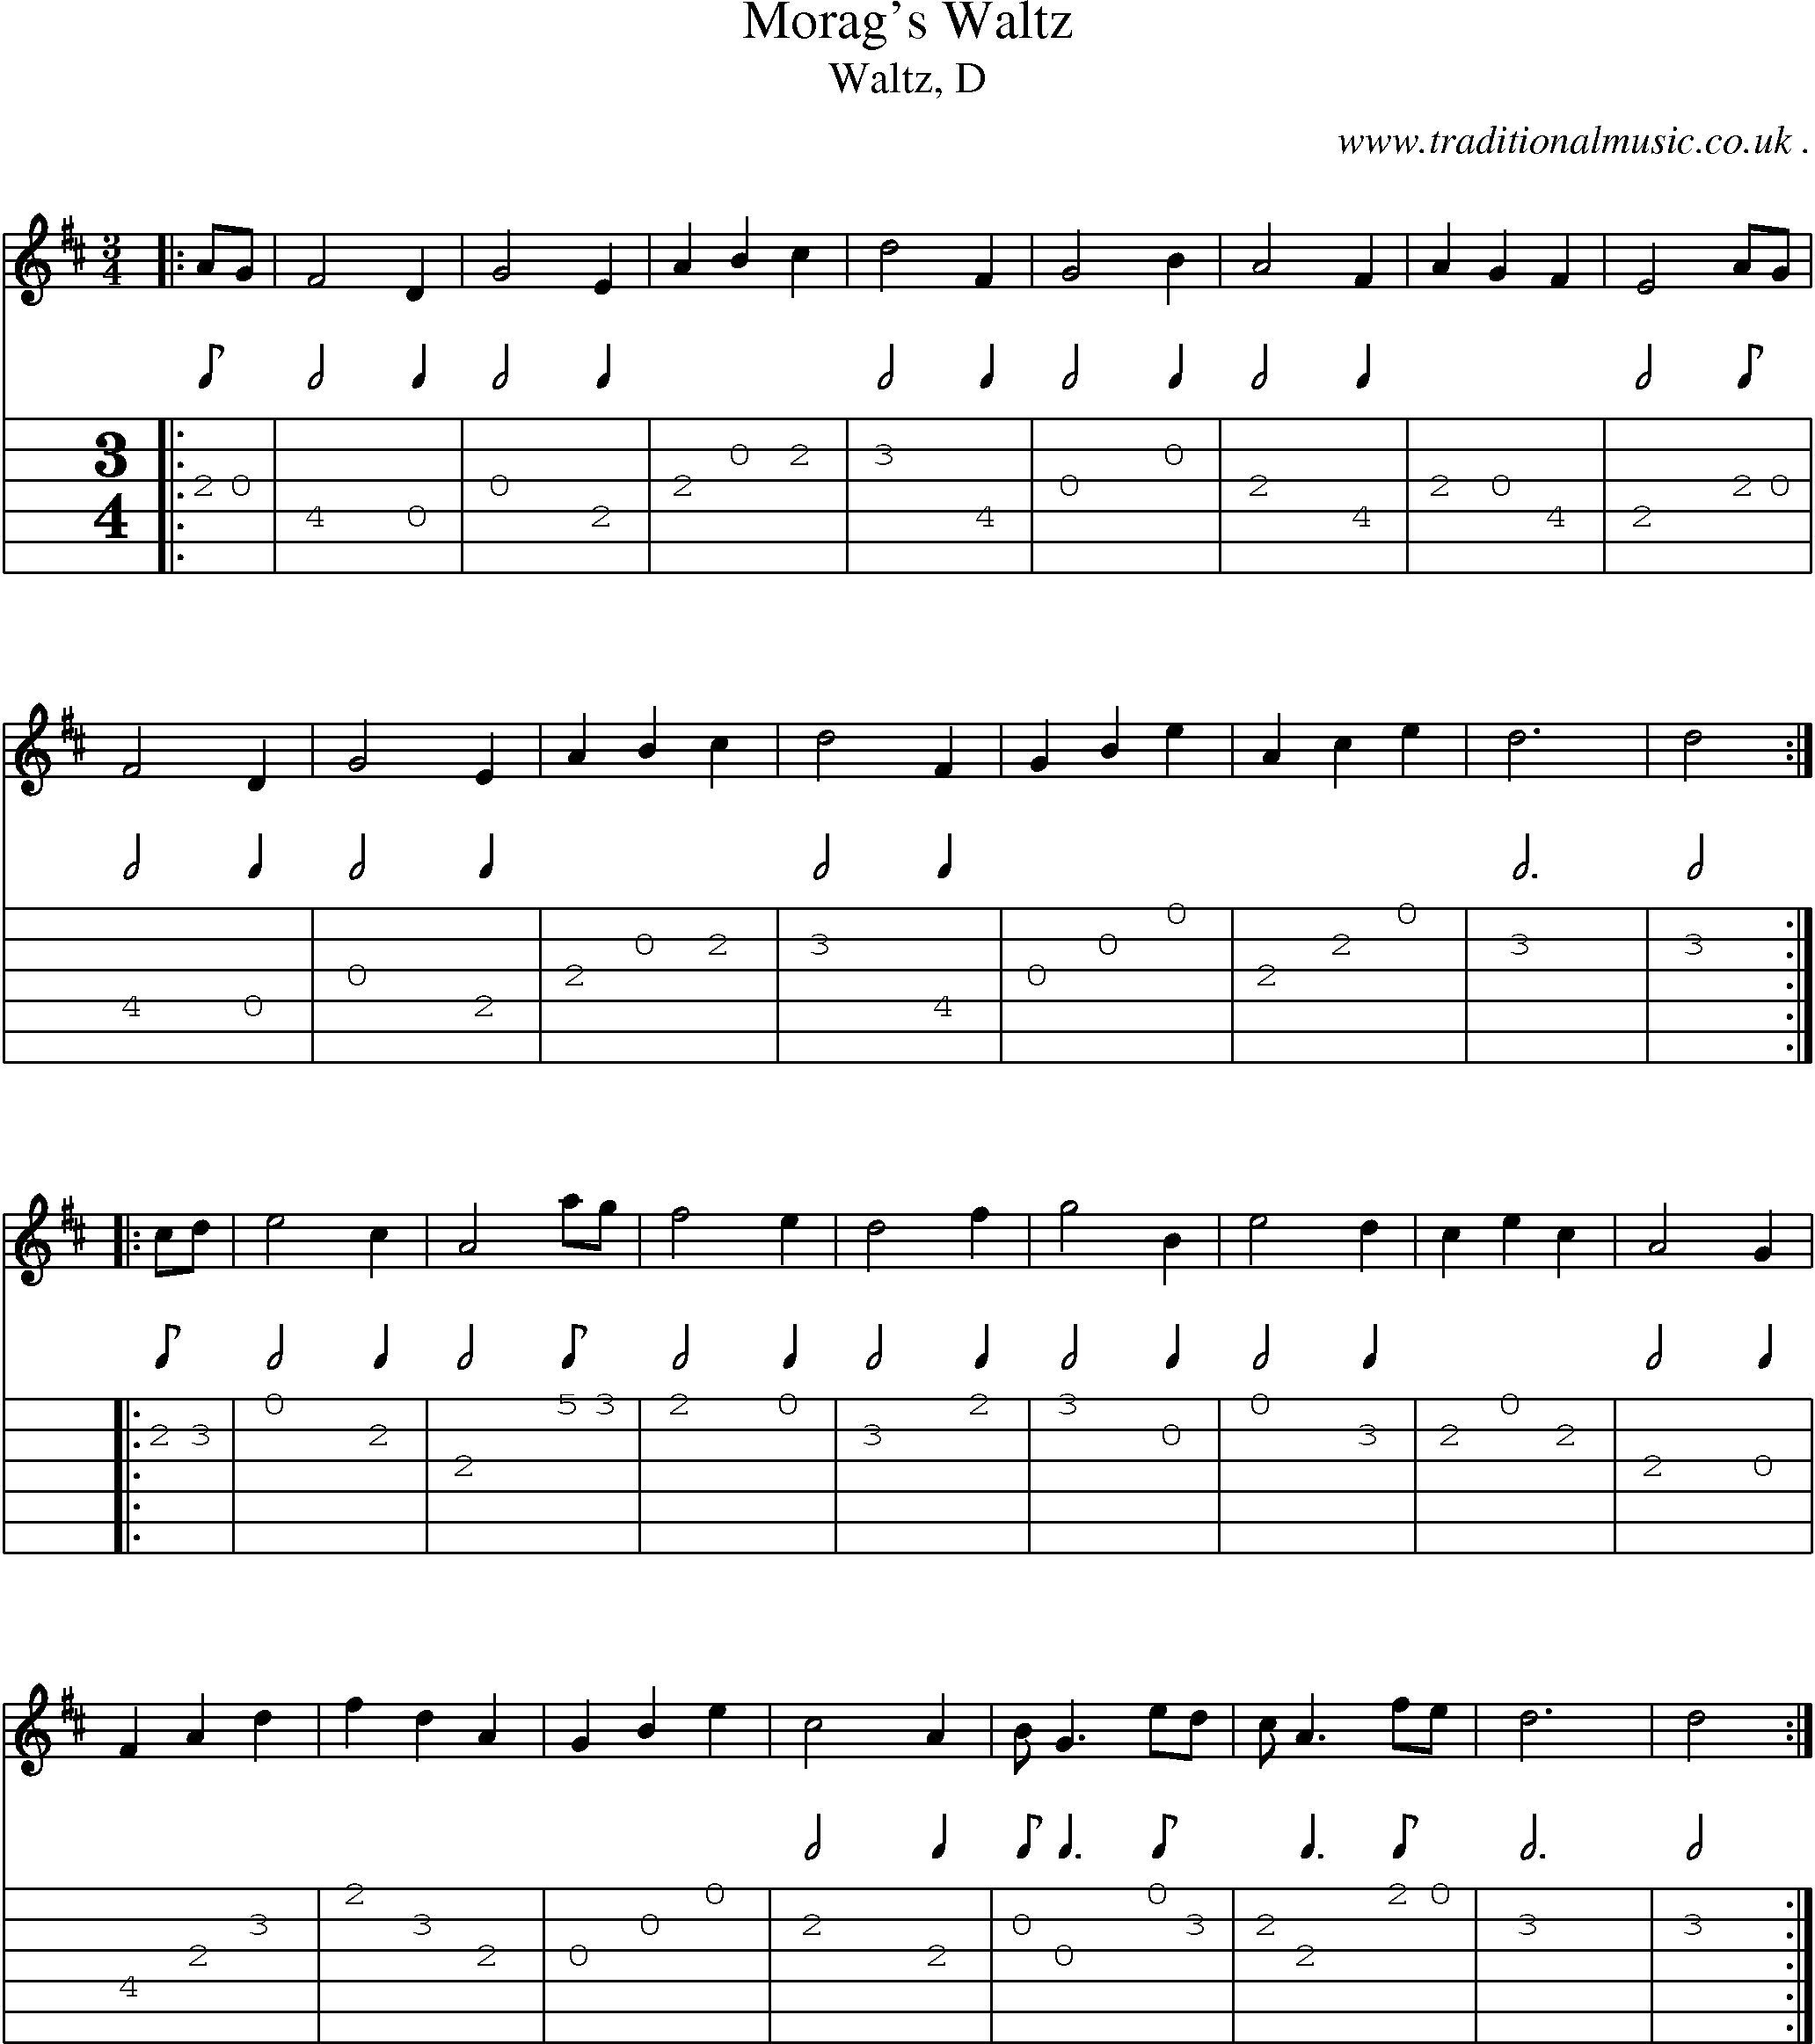 Sheet-music  score, Chords and Guitar Tabs for Morags Waltz